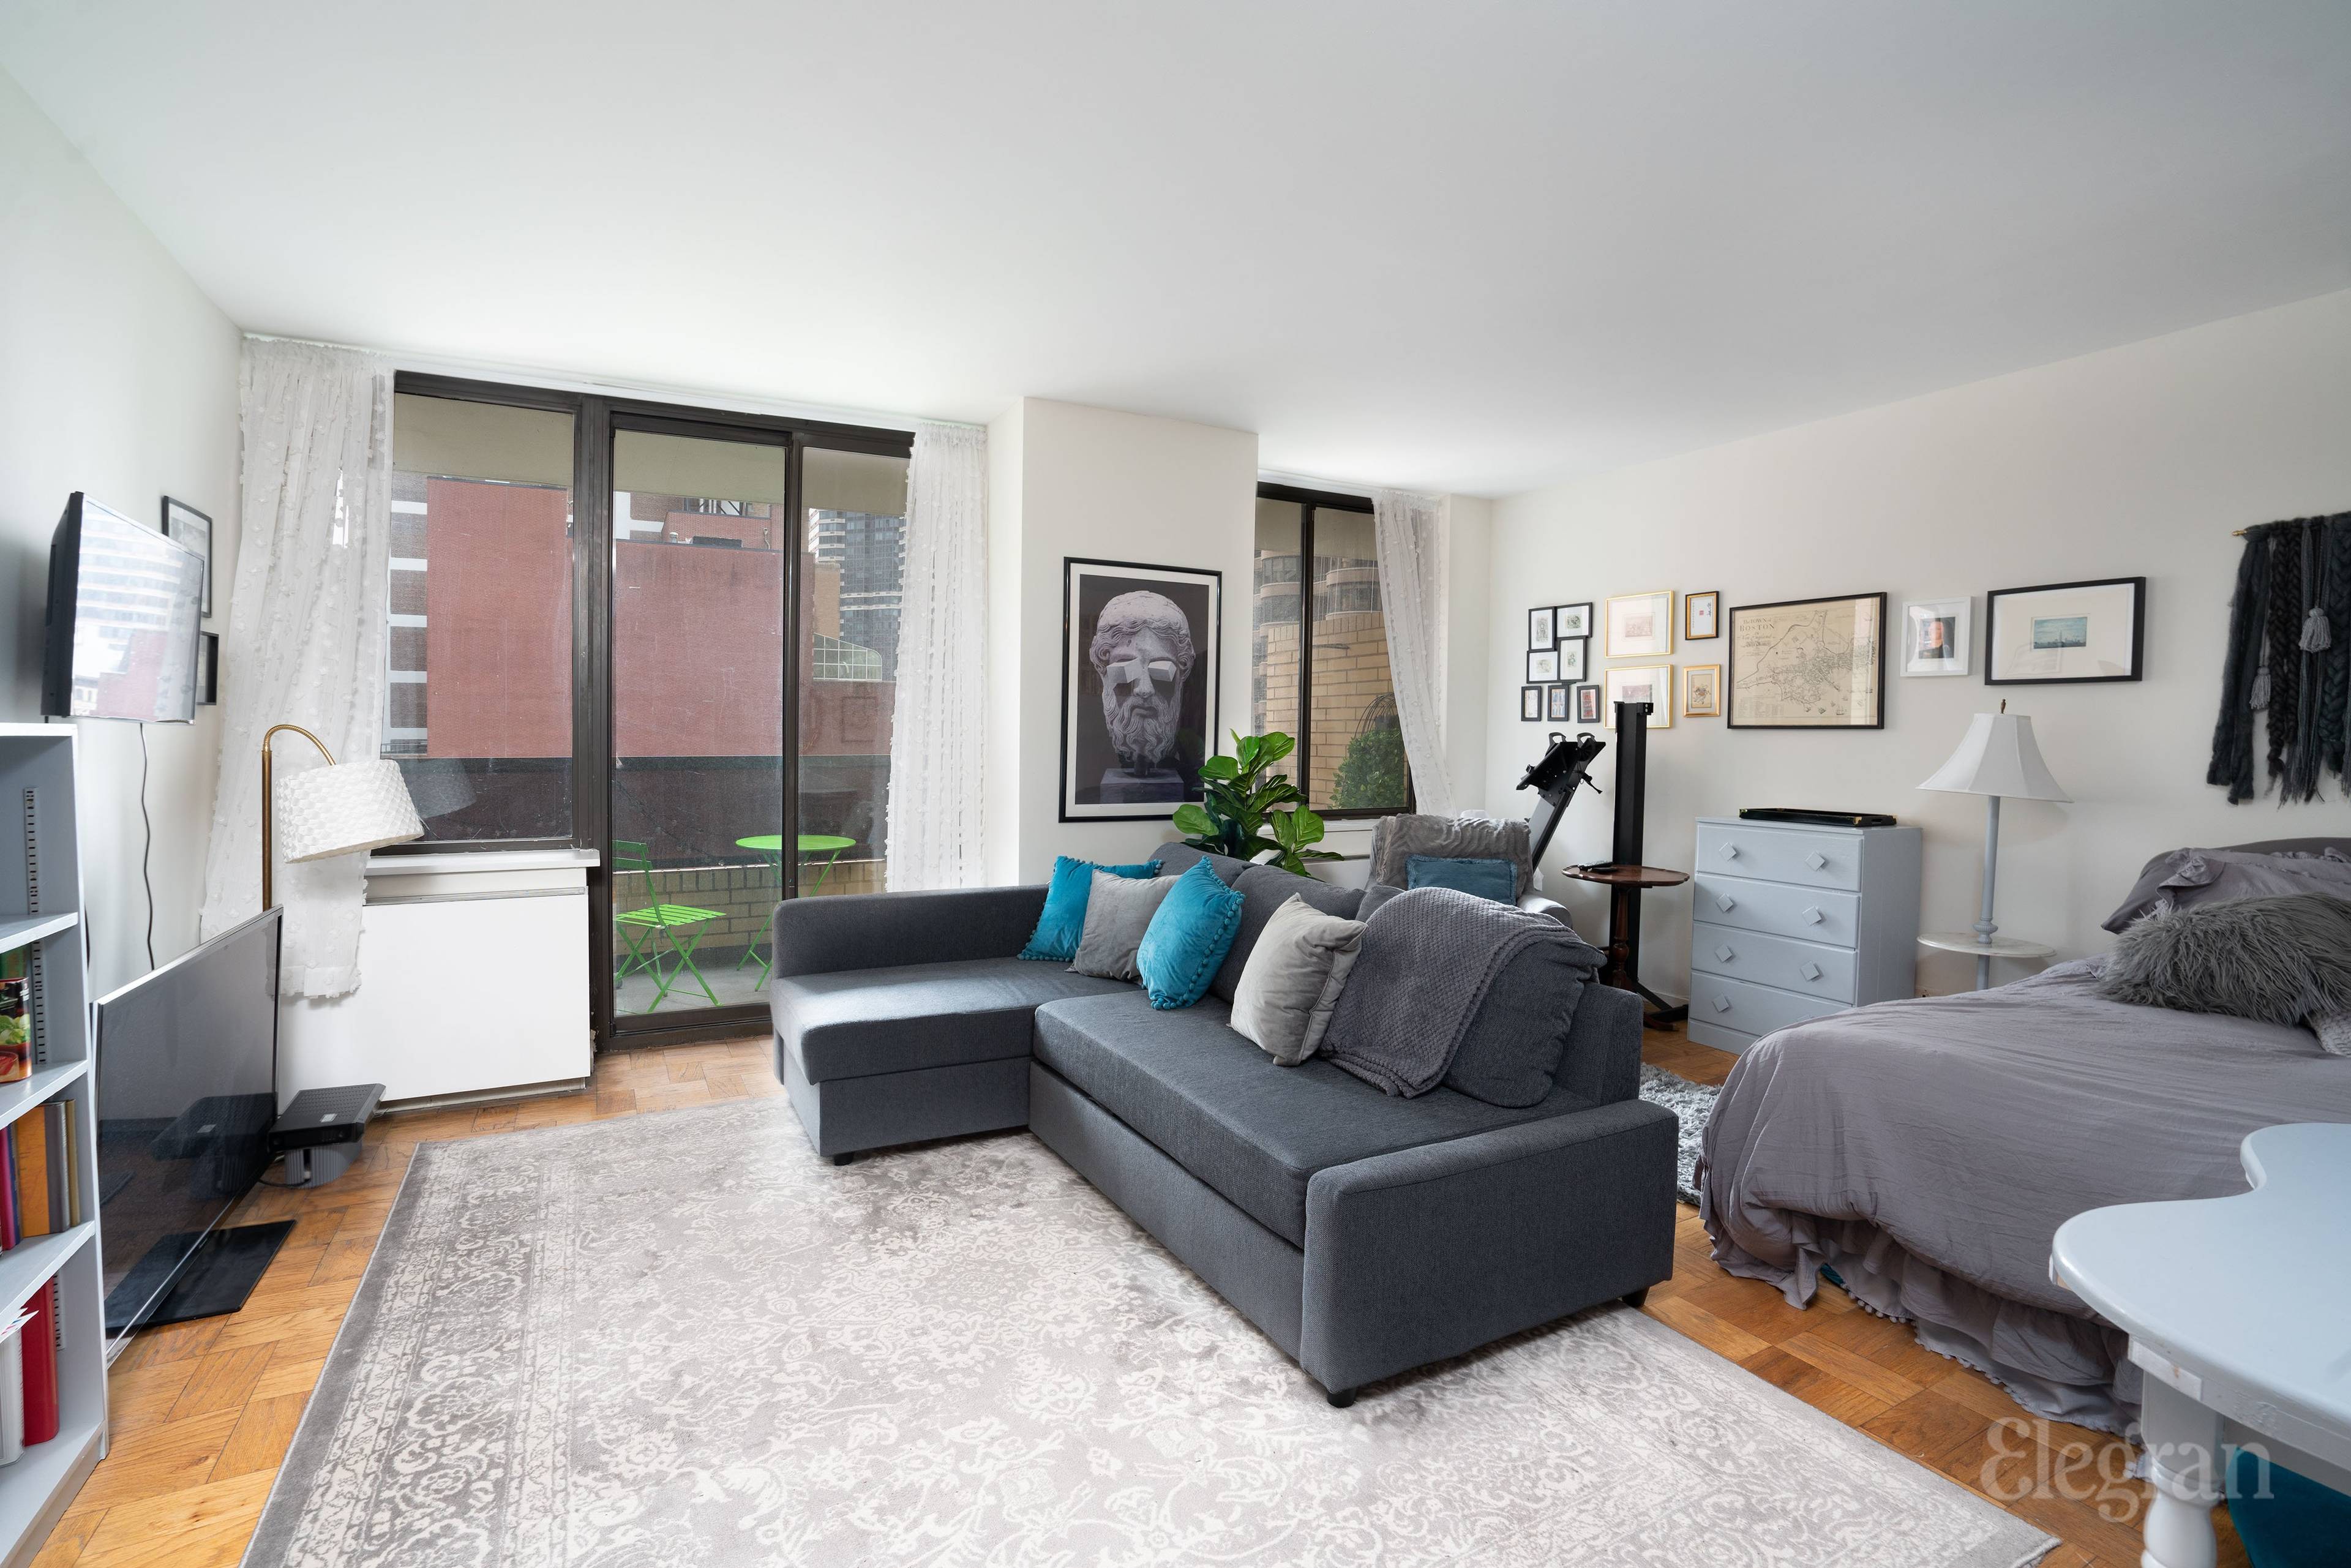 This spacious, sunlit apartment has plenty of room to create divided living sleeping spaces.